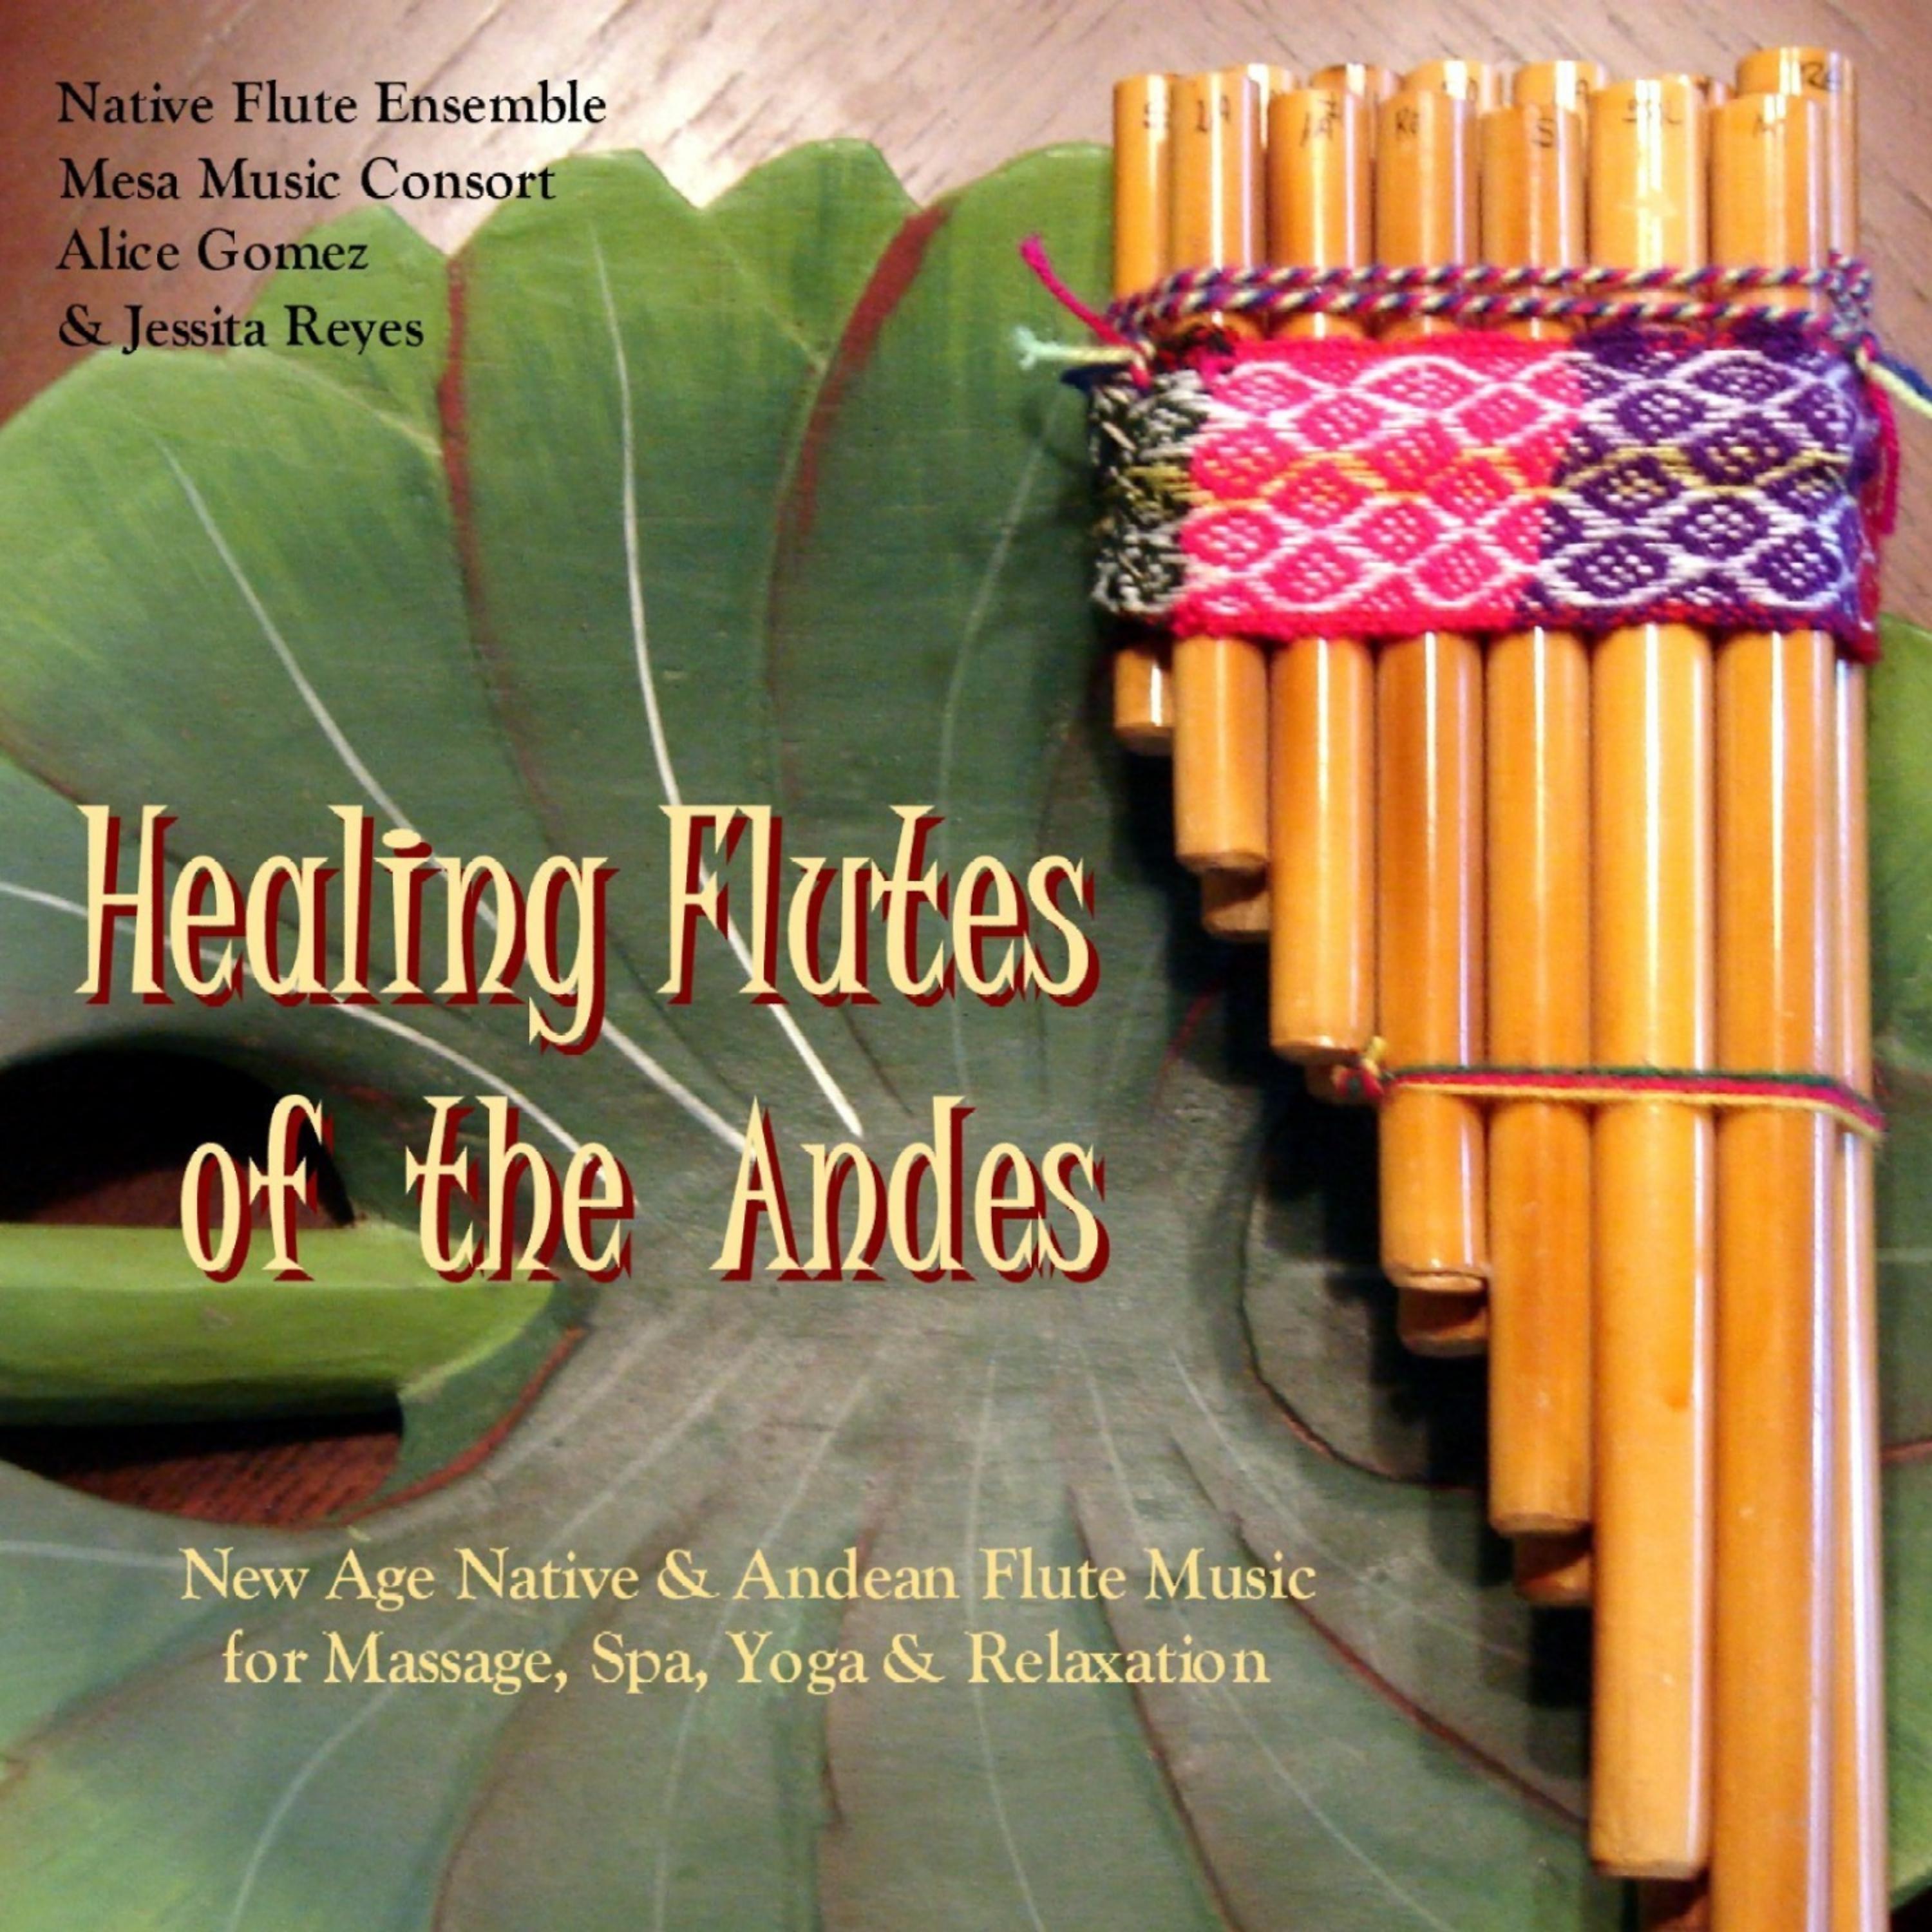 Постер альбома Healing Flutes of the Andes (Native American Flute & Andean Panpipes for Massage, Yoga, Spas & Relaxation)